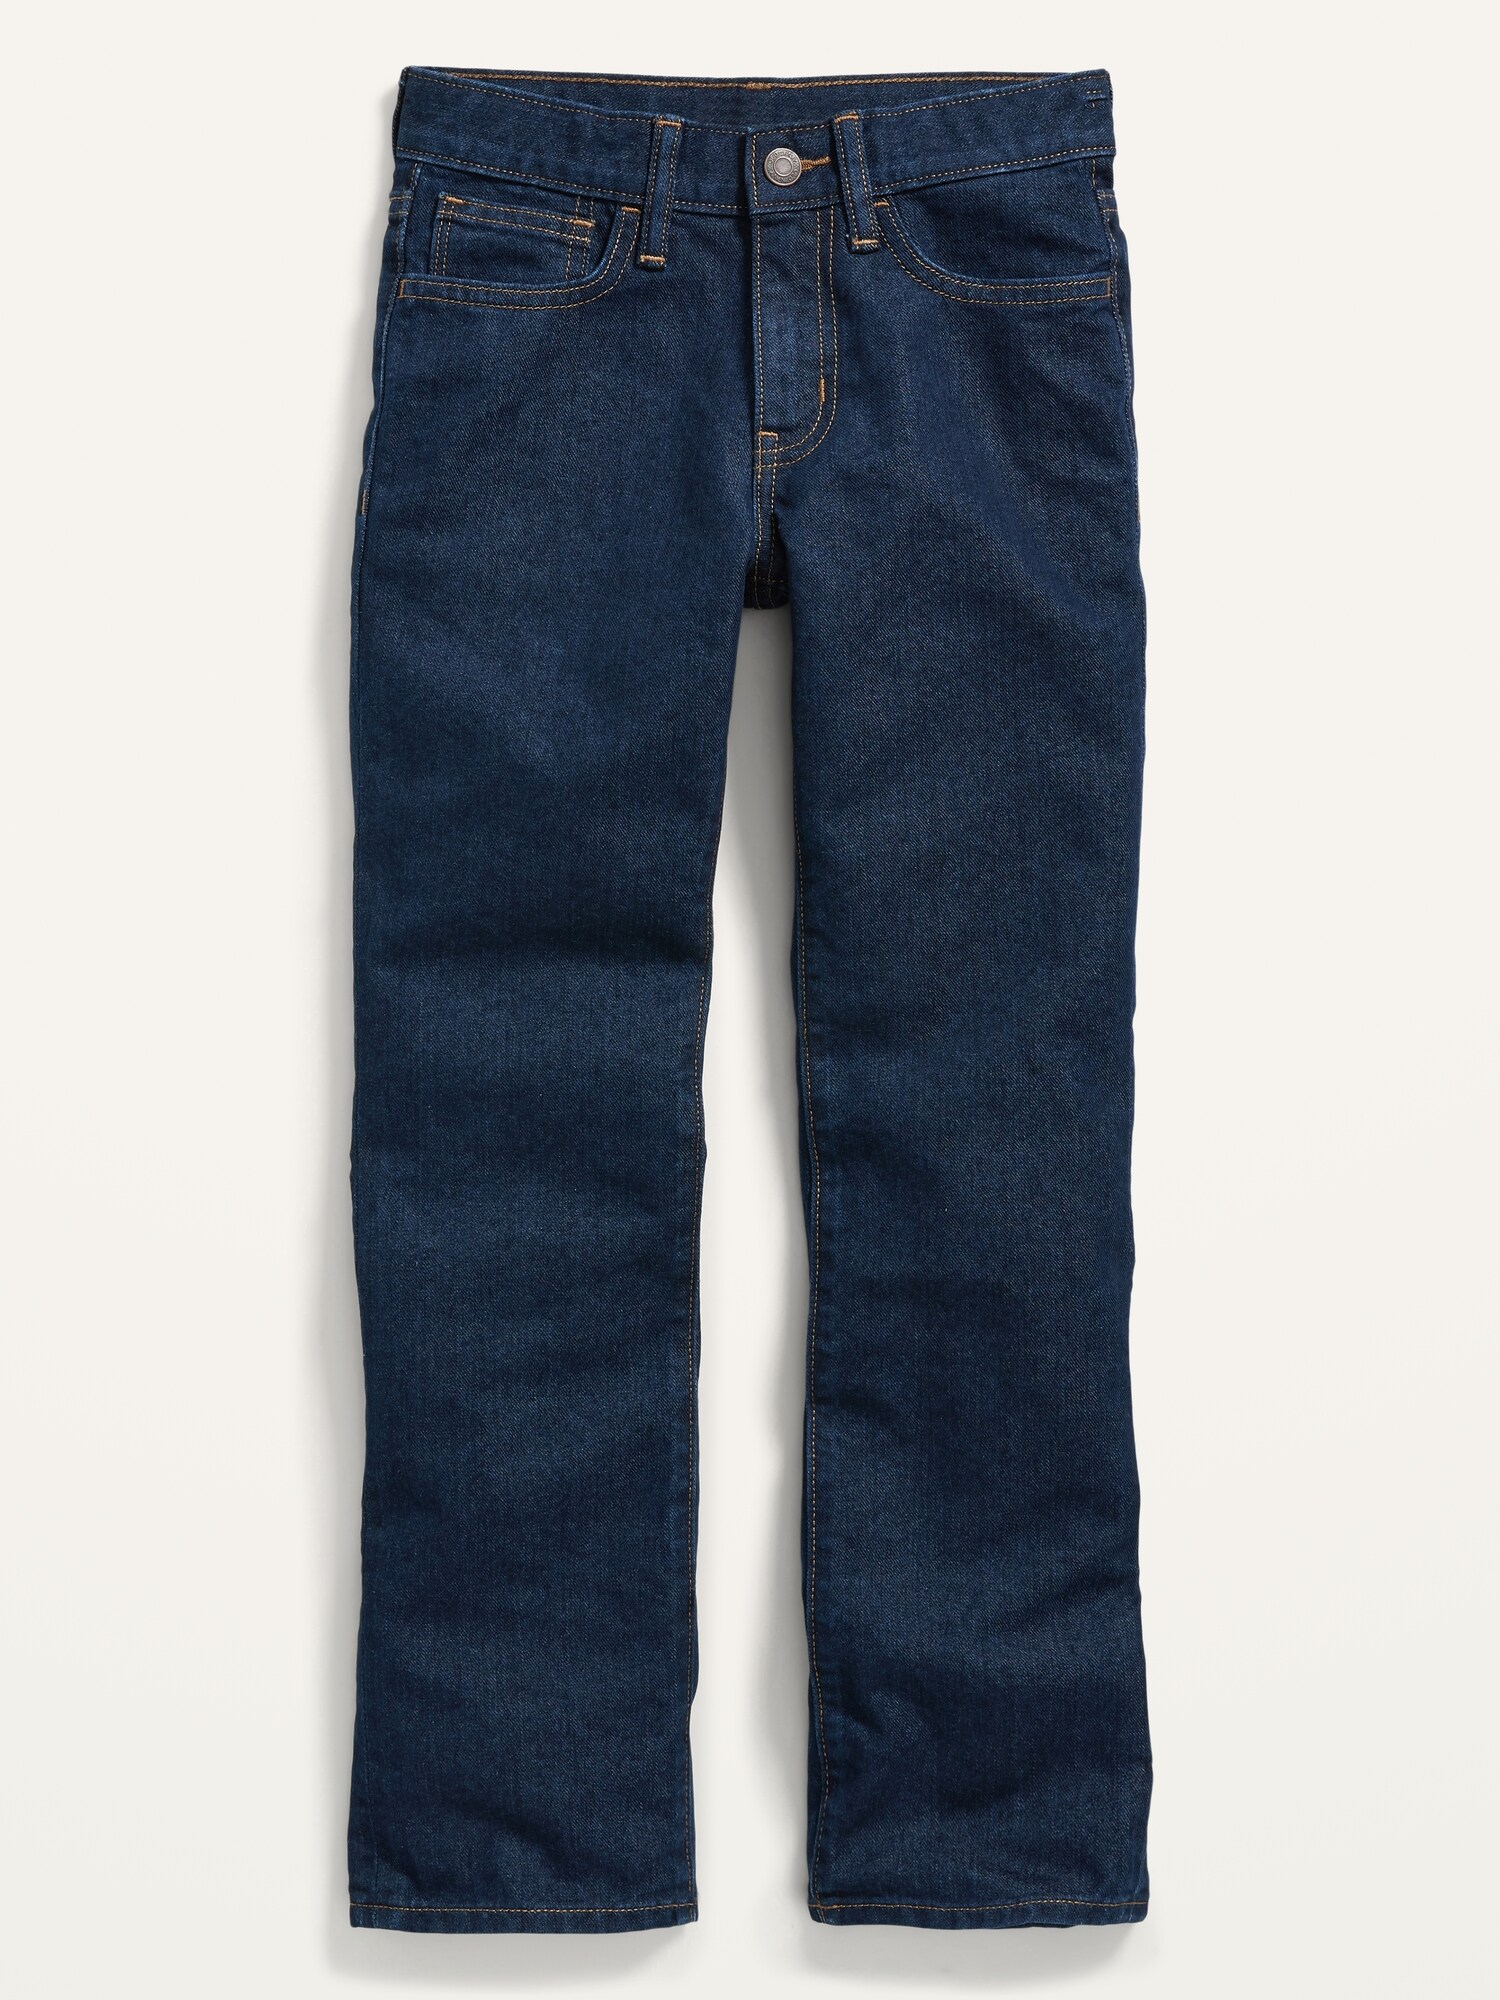 Relaxed Straight Non-Stretch Jeans for Boys